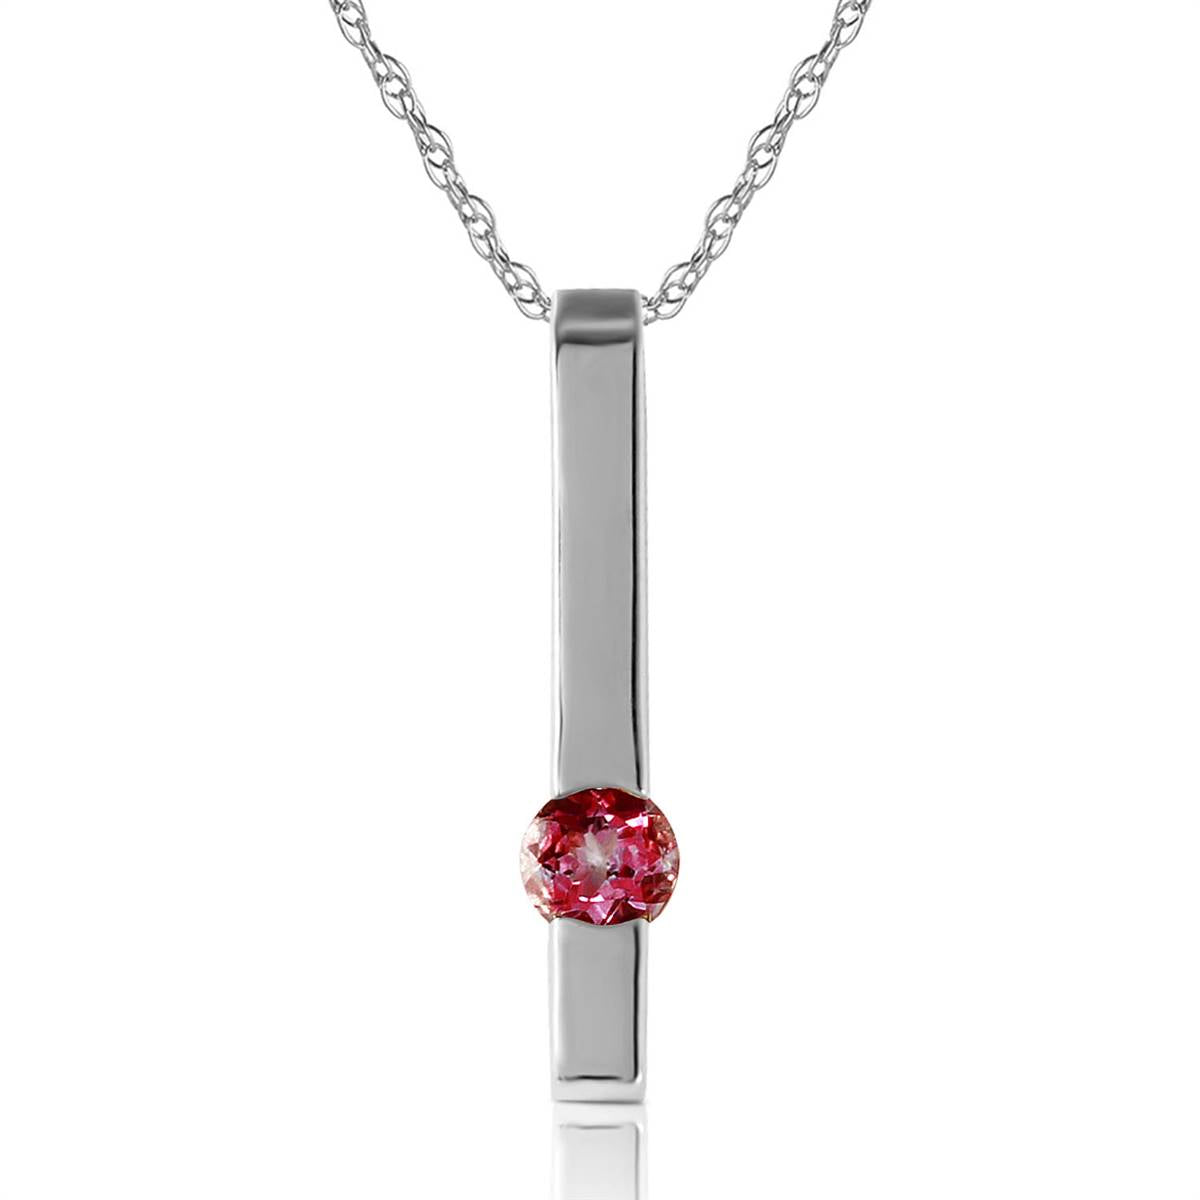 0.25 Carat 14K Solid White Gold Look Inward Pink Topaz Necklace